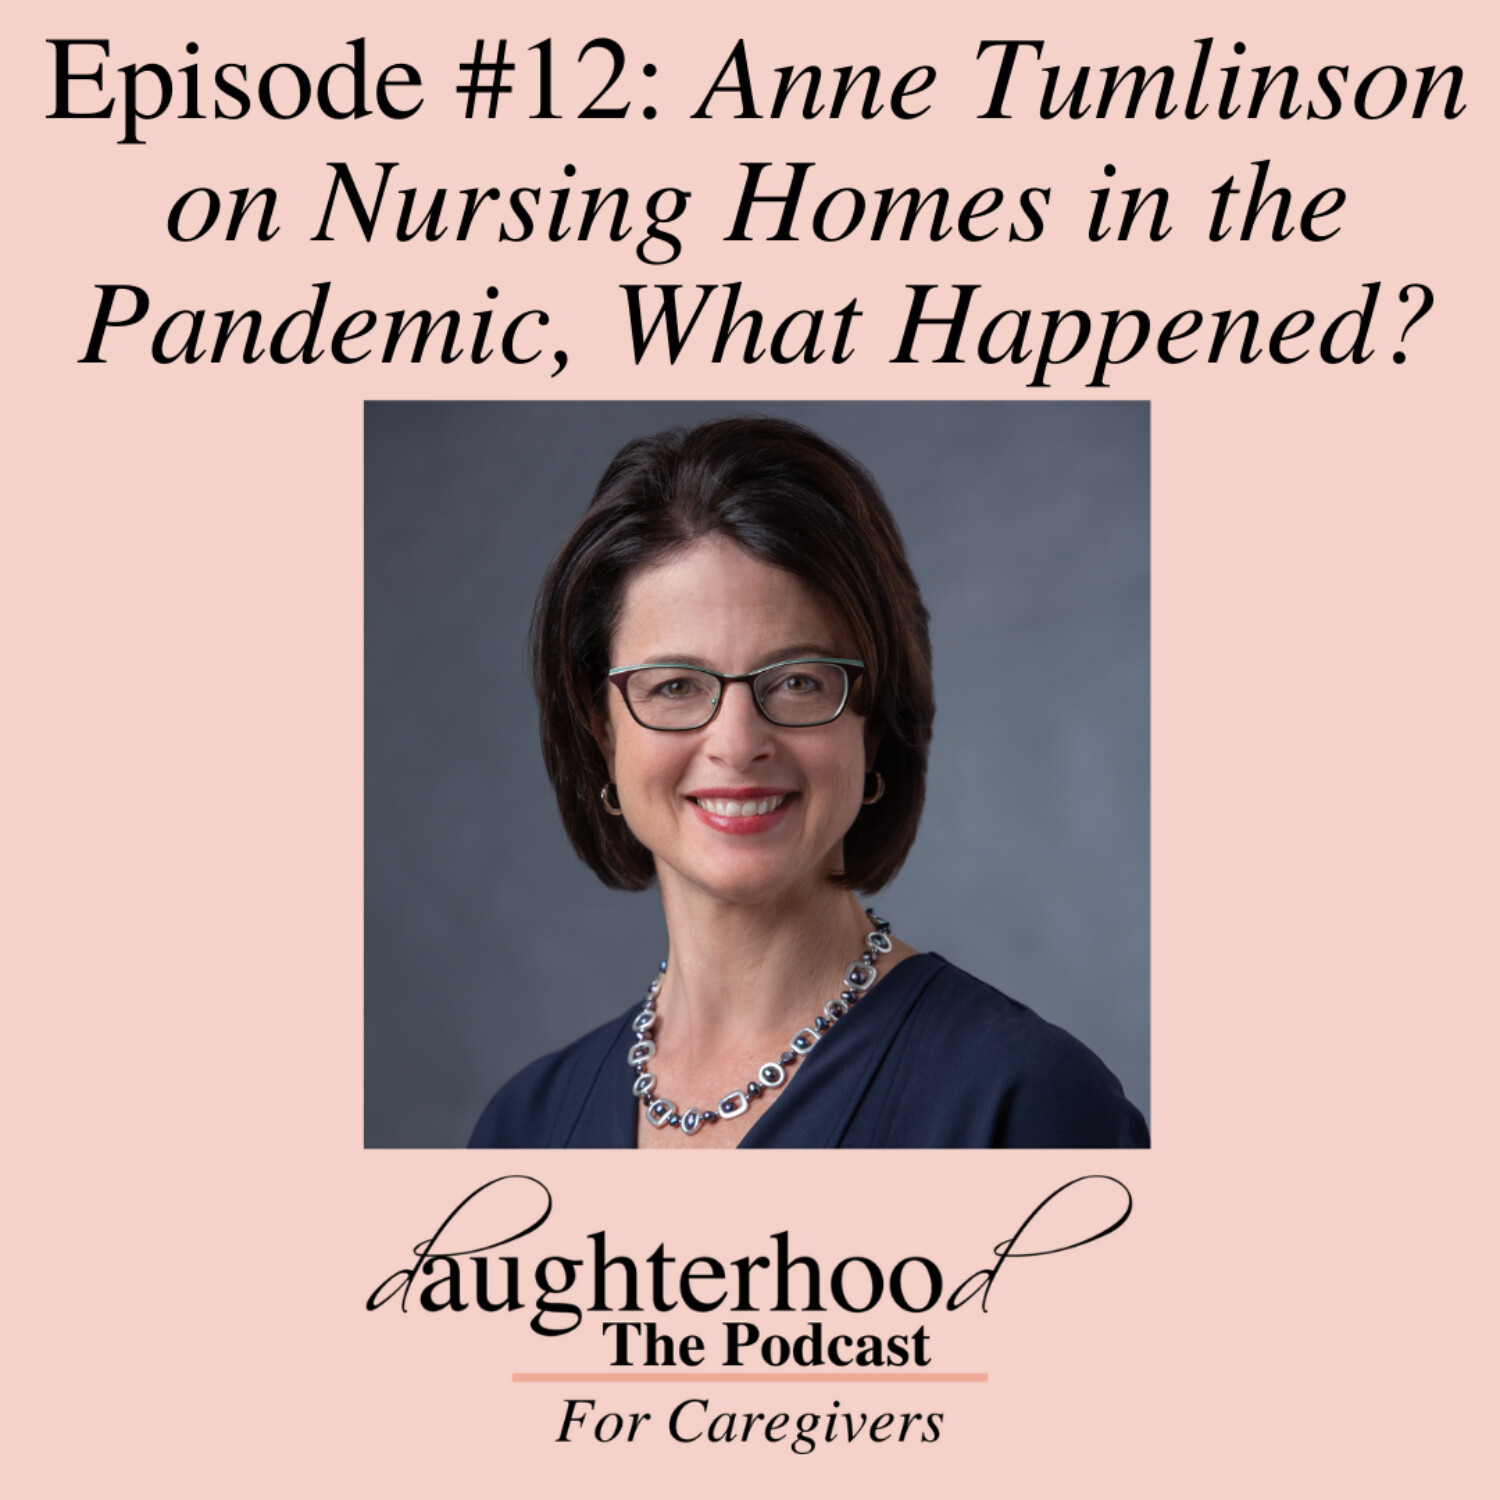 Anne Tumlinson on Nursing Homes in the Pandemic, What Happened?